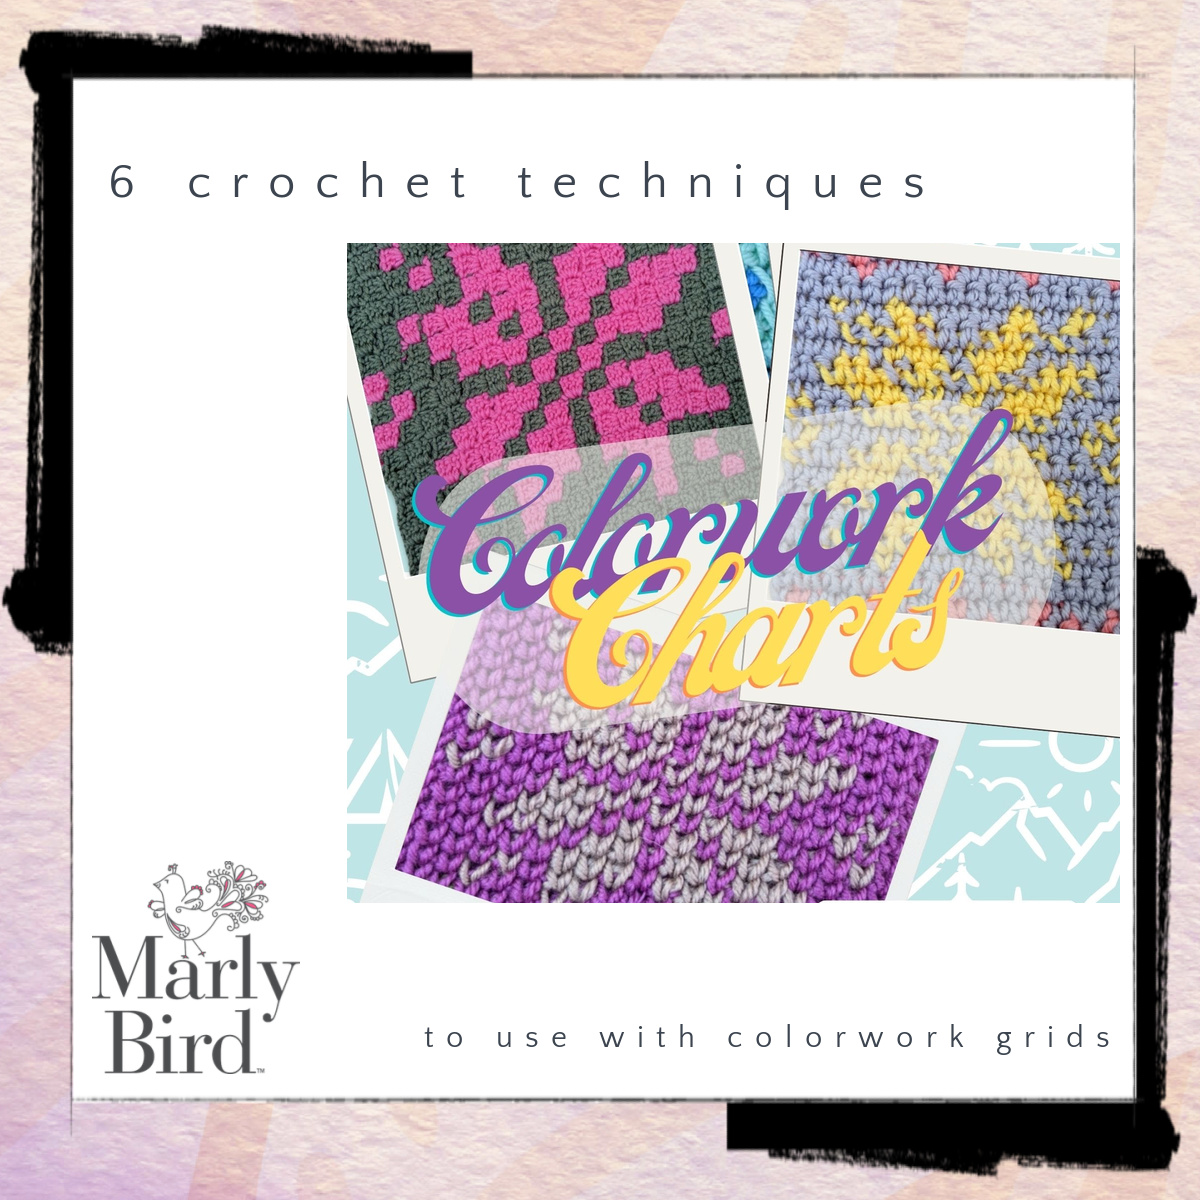 crochet techniques colorwork charts Marly Bird